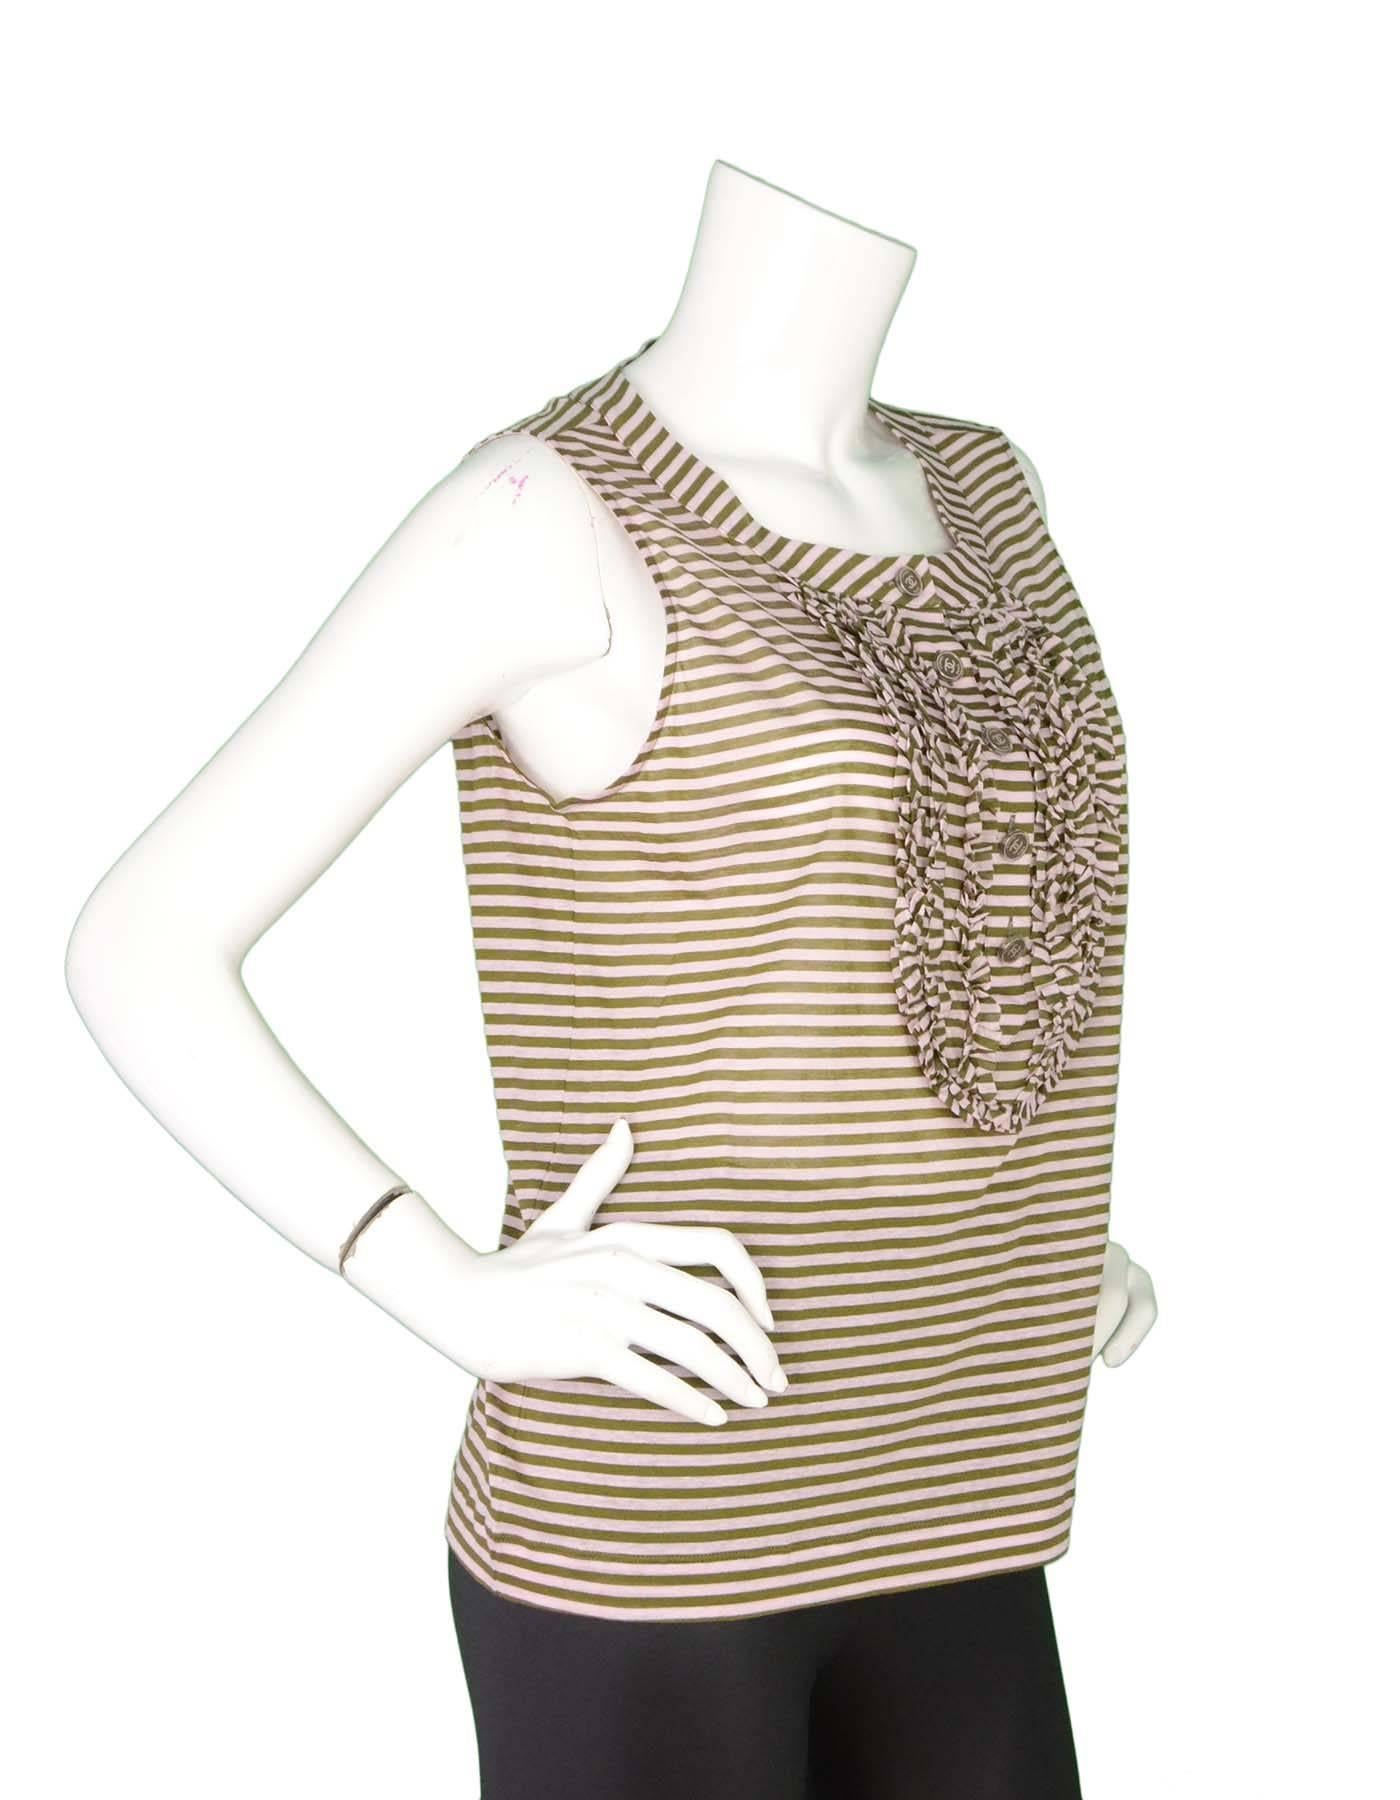 Chanel Pink and Green Striped Top Sz 48
Features ruffle detail at bust

Made In: France
Year Of Production: 2009 Spring
Color: Pink and green
Composition: 100% Cotton
Lining: None
Retail Price: $1,380 + tax
Closure/Opening: Front button